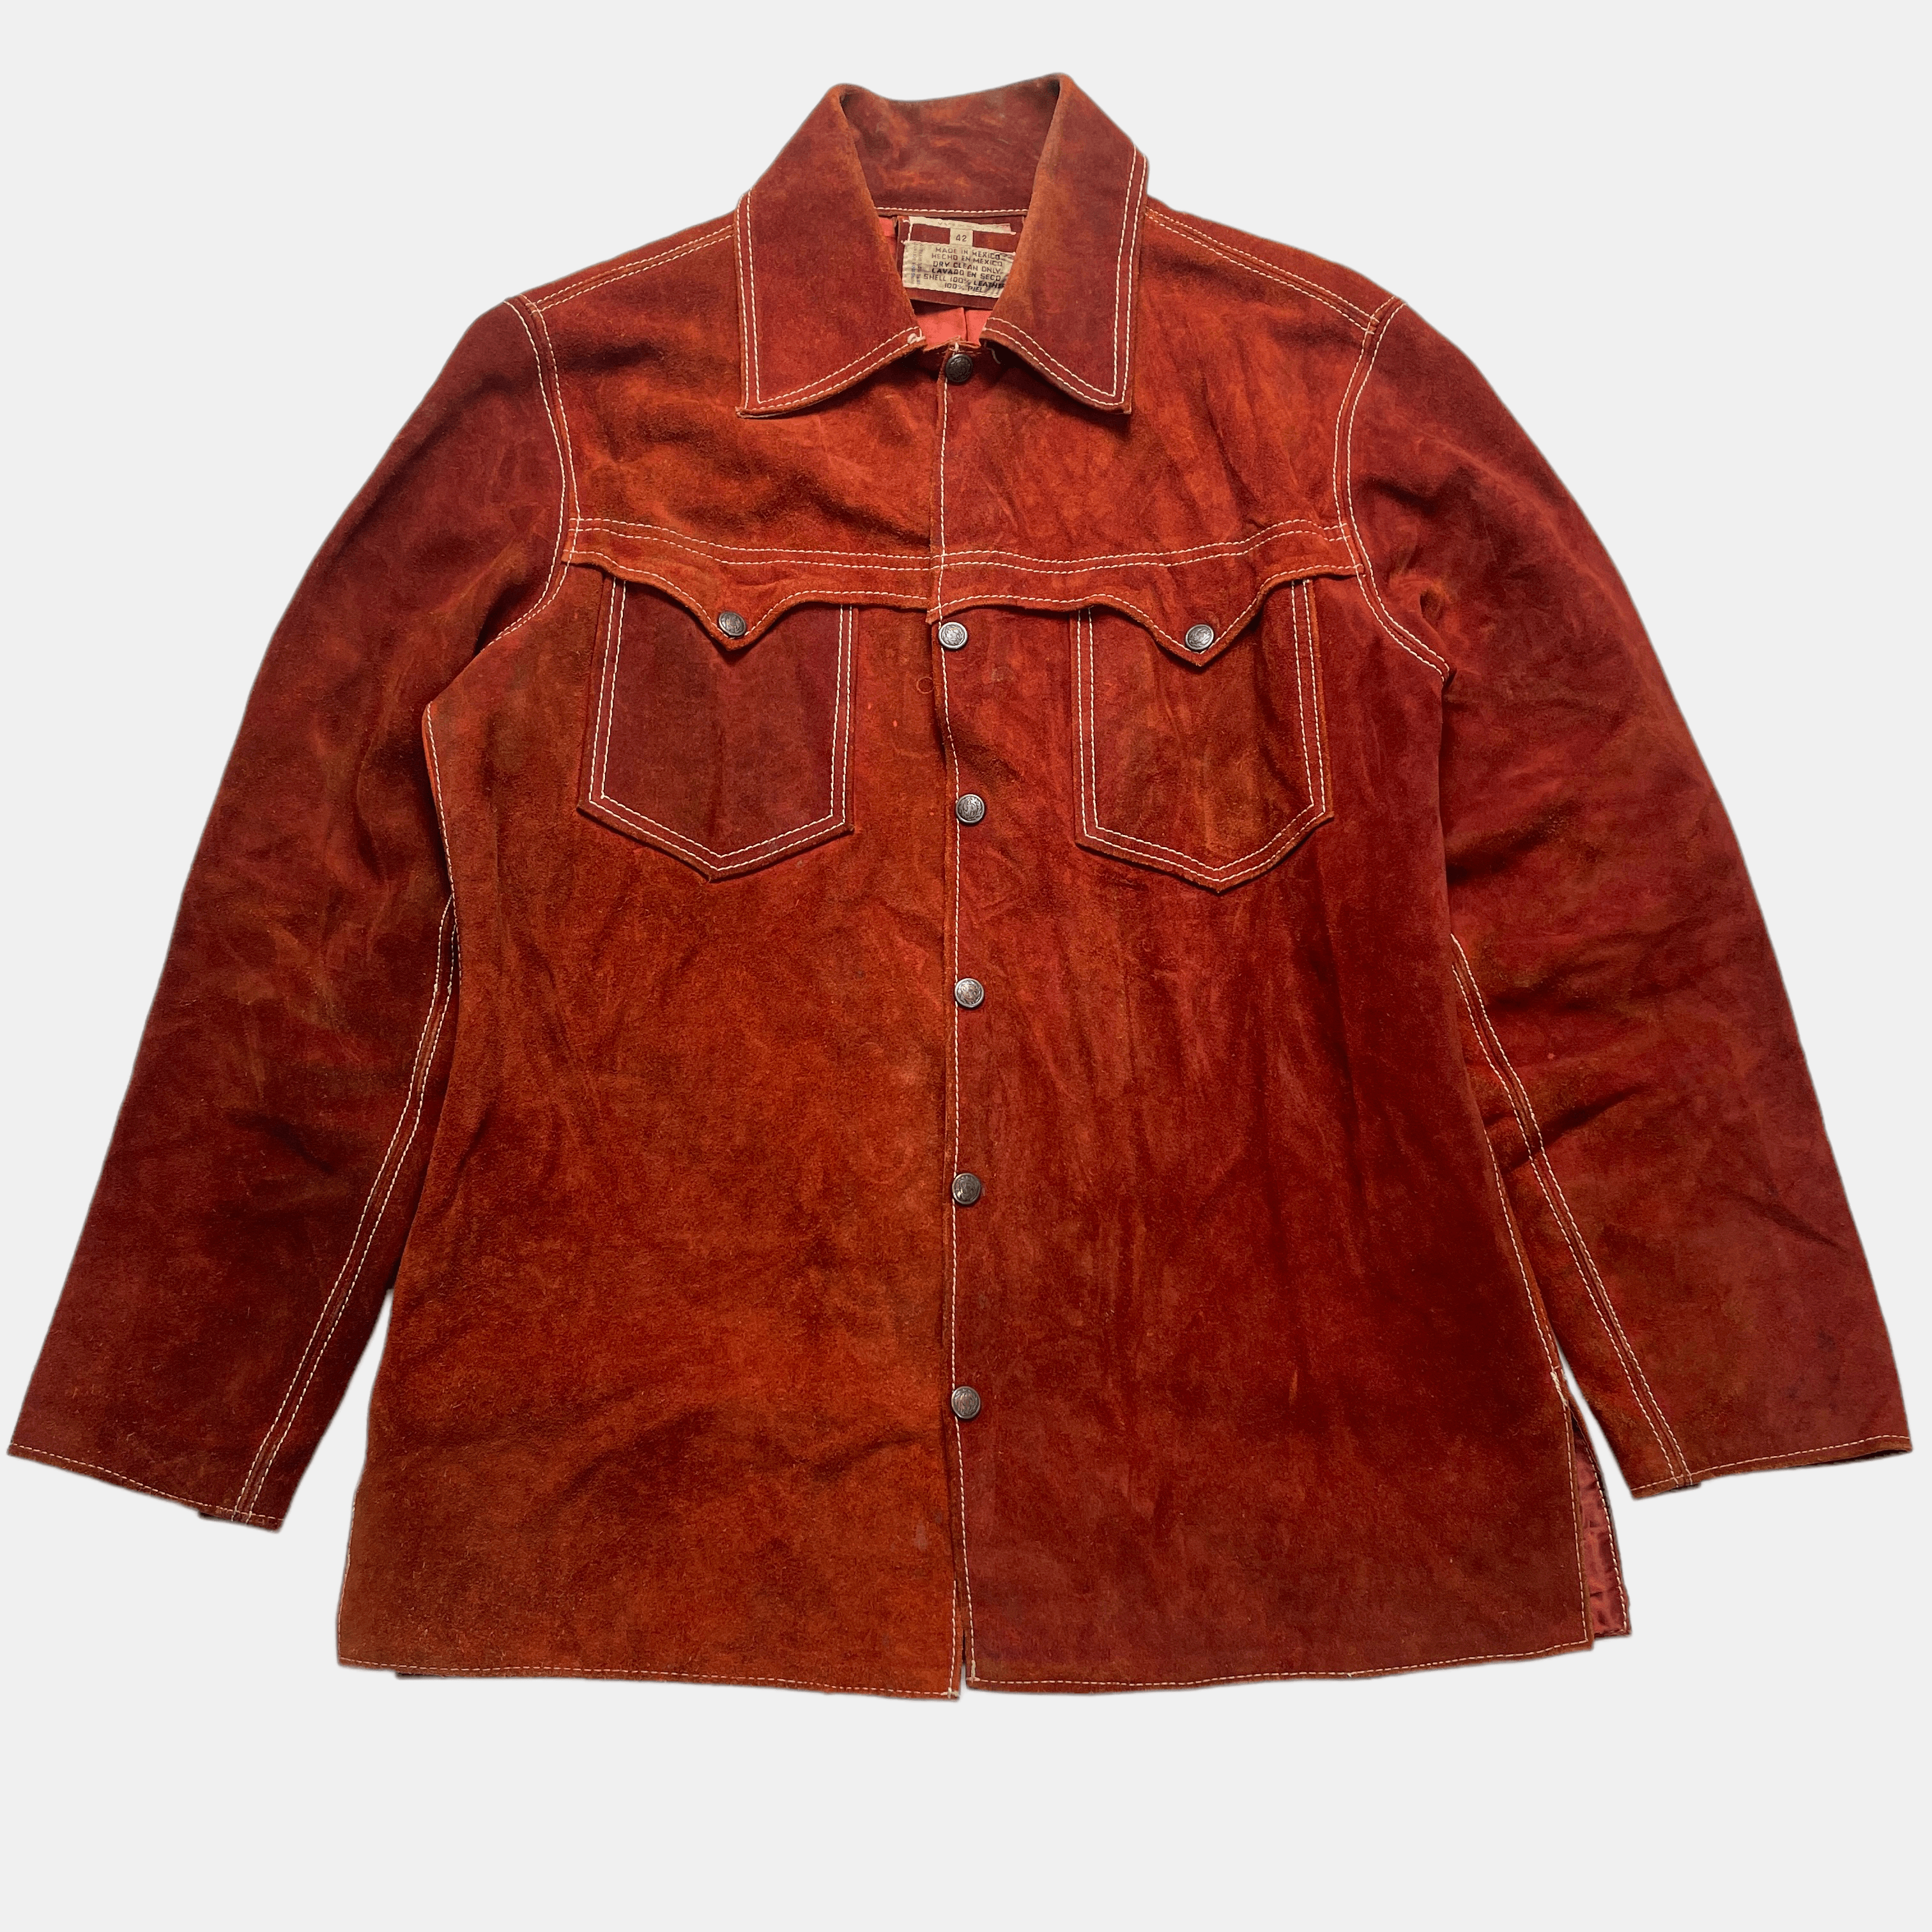 1970s BandC South Western Leather Jacket